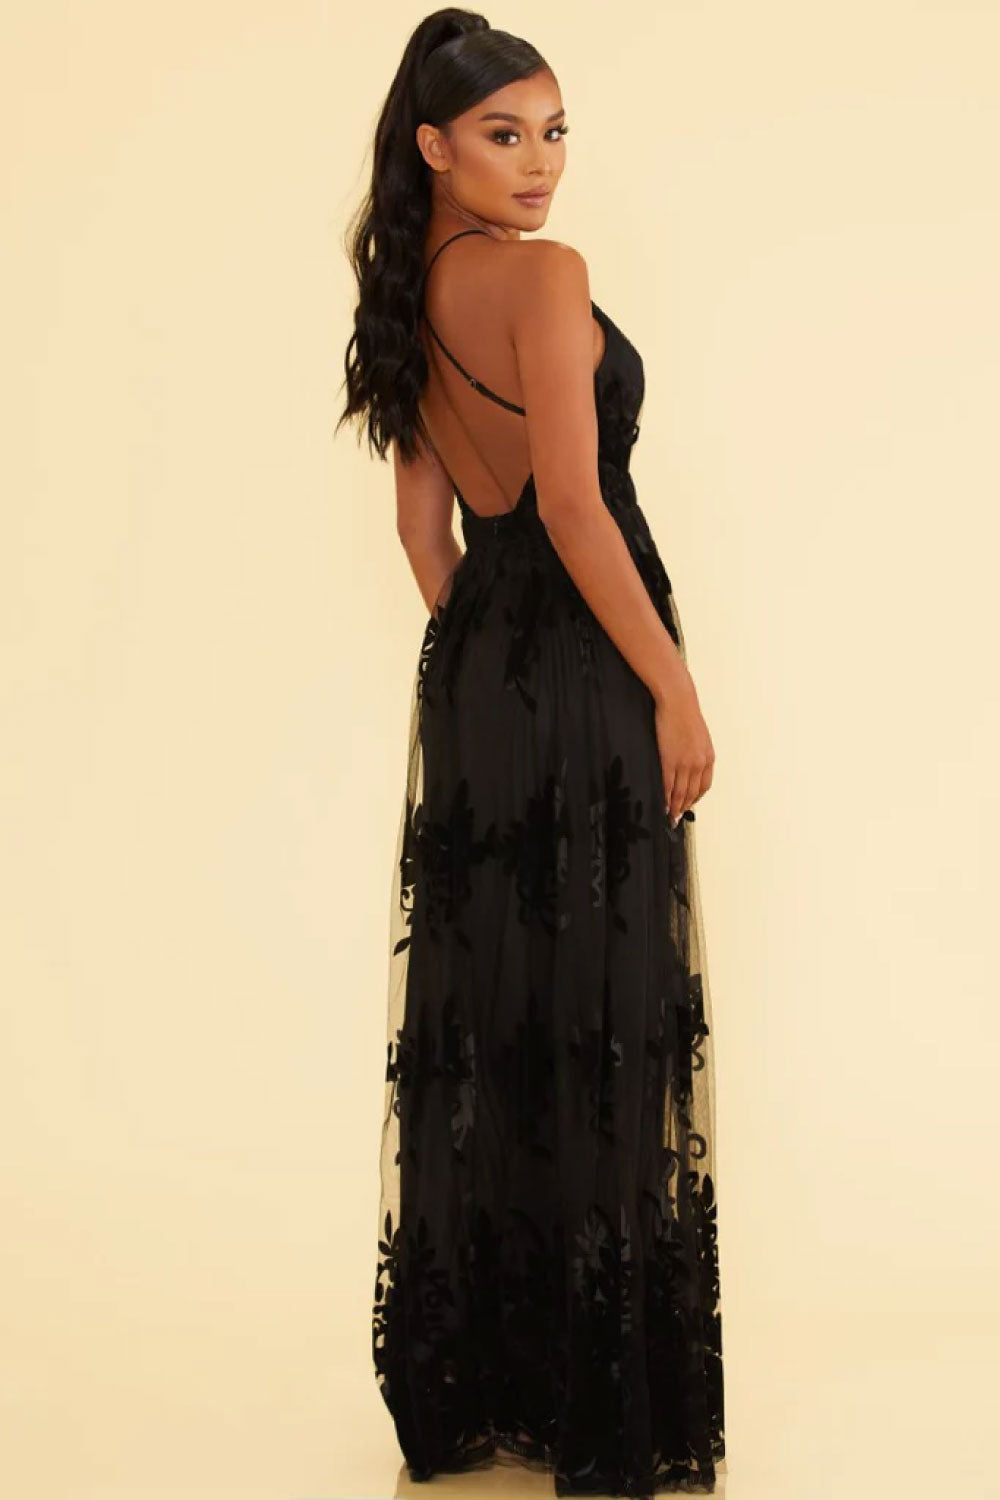 Image of the back of Luxxel's Elegant Lace Gown in Black on a model.